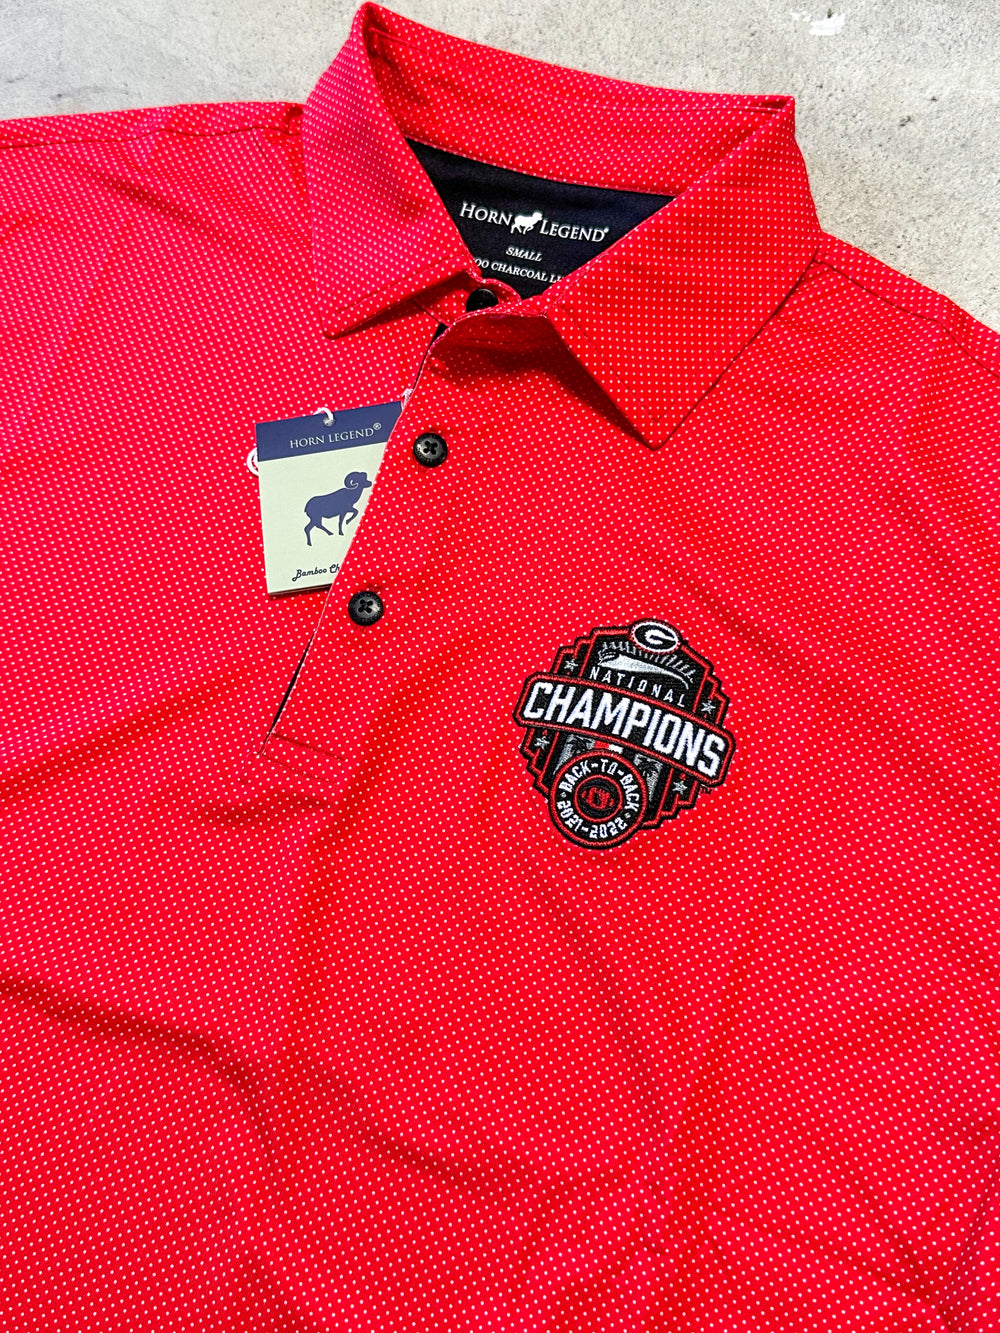 Horn Legend | YOUTH Gameday Polo - Champions Dot